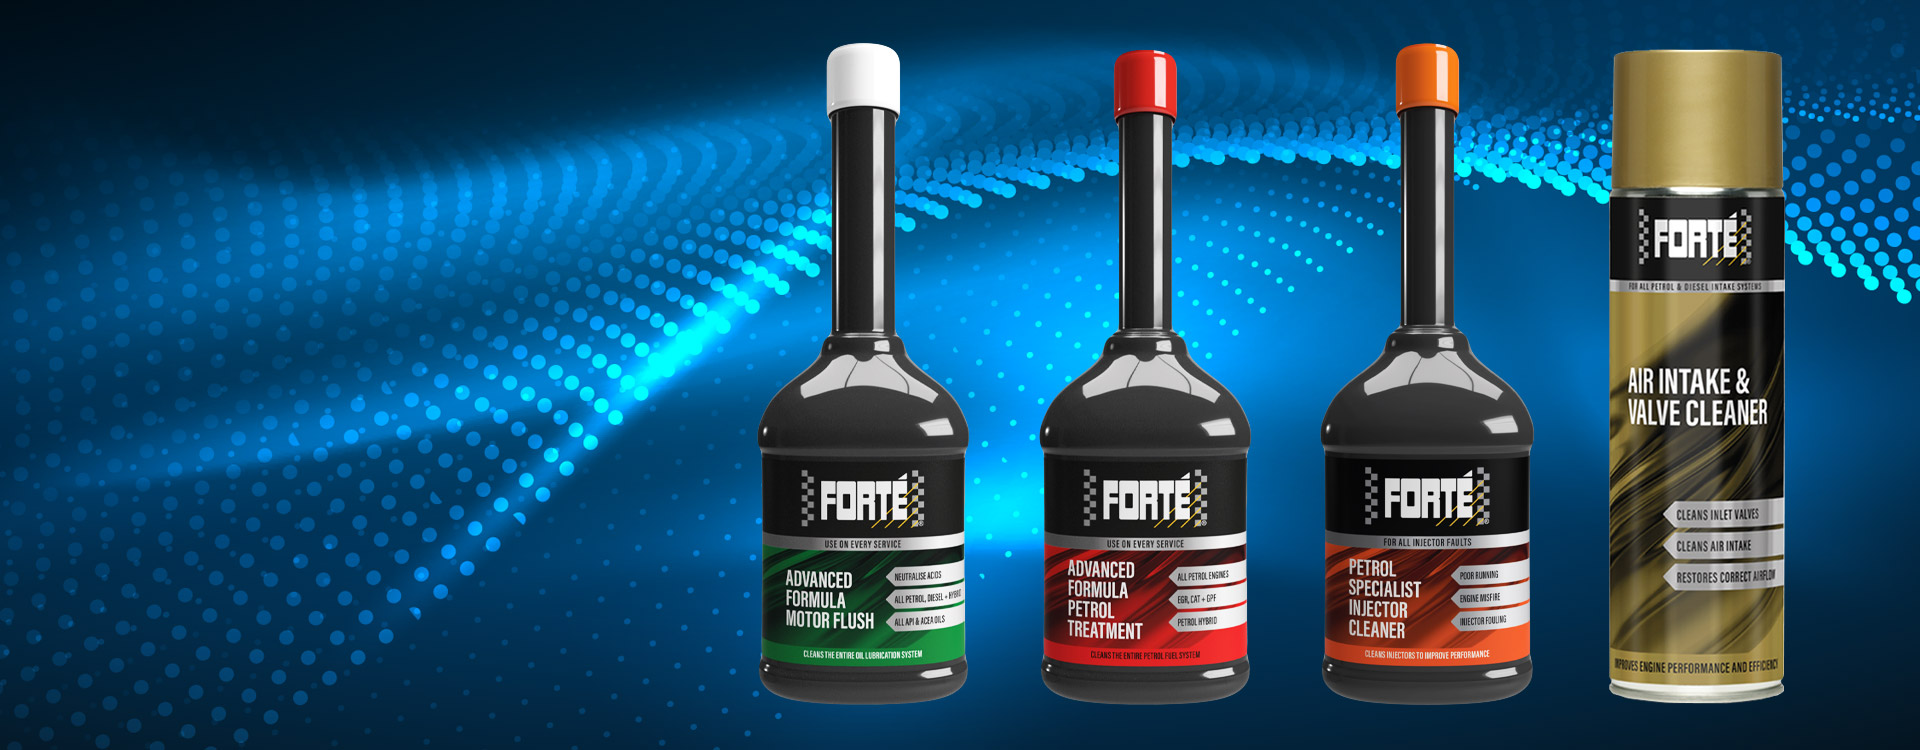 Forte products can reduce chance of LSPI events occurring